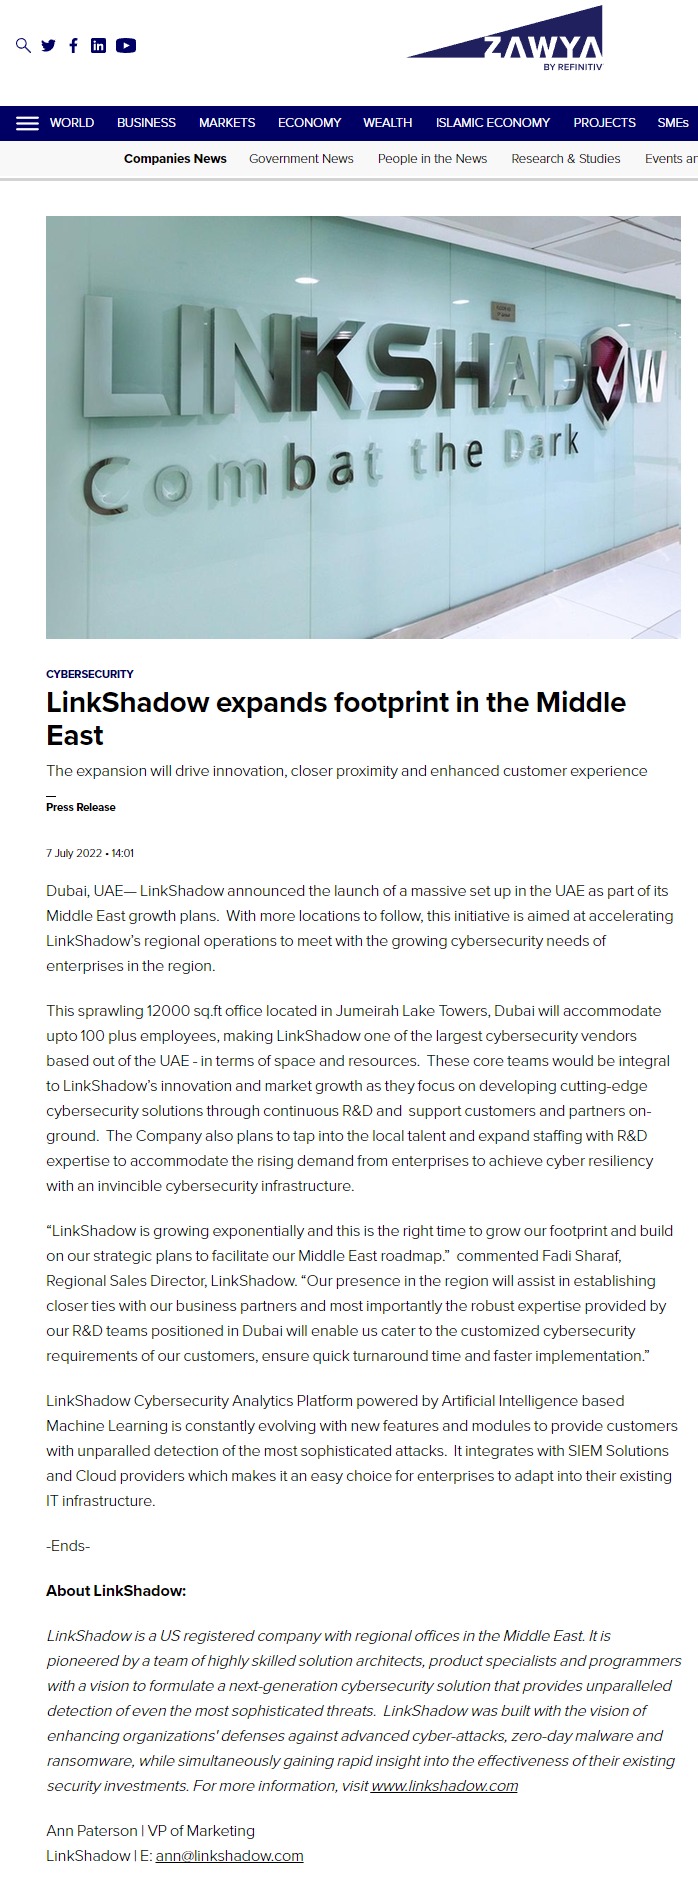 LinkShadow expands footprint in the Middle East